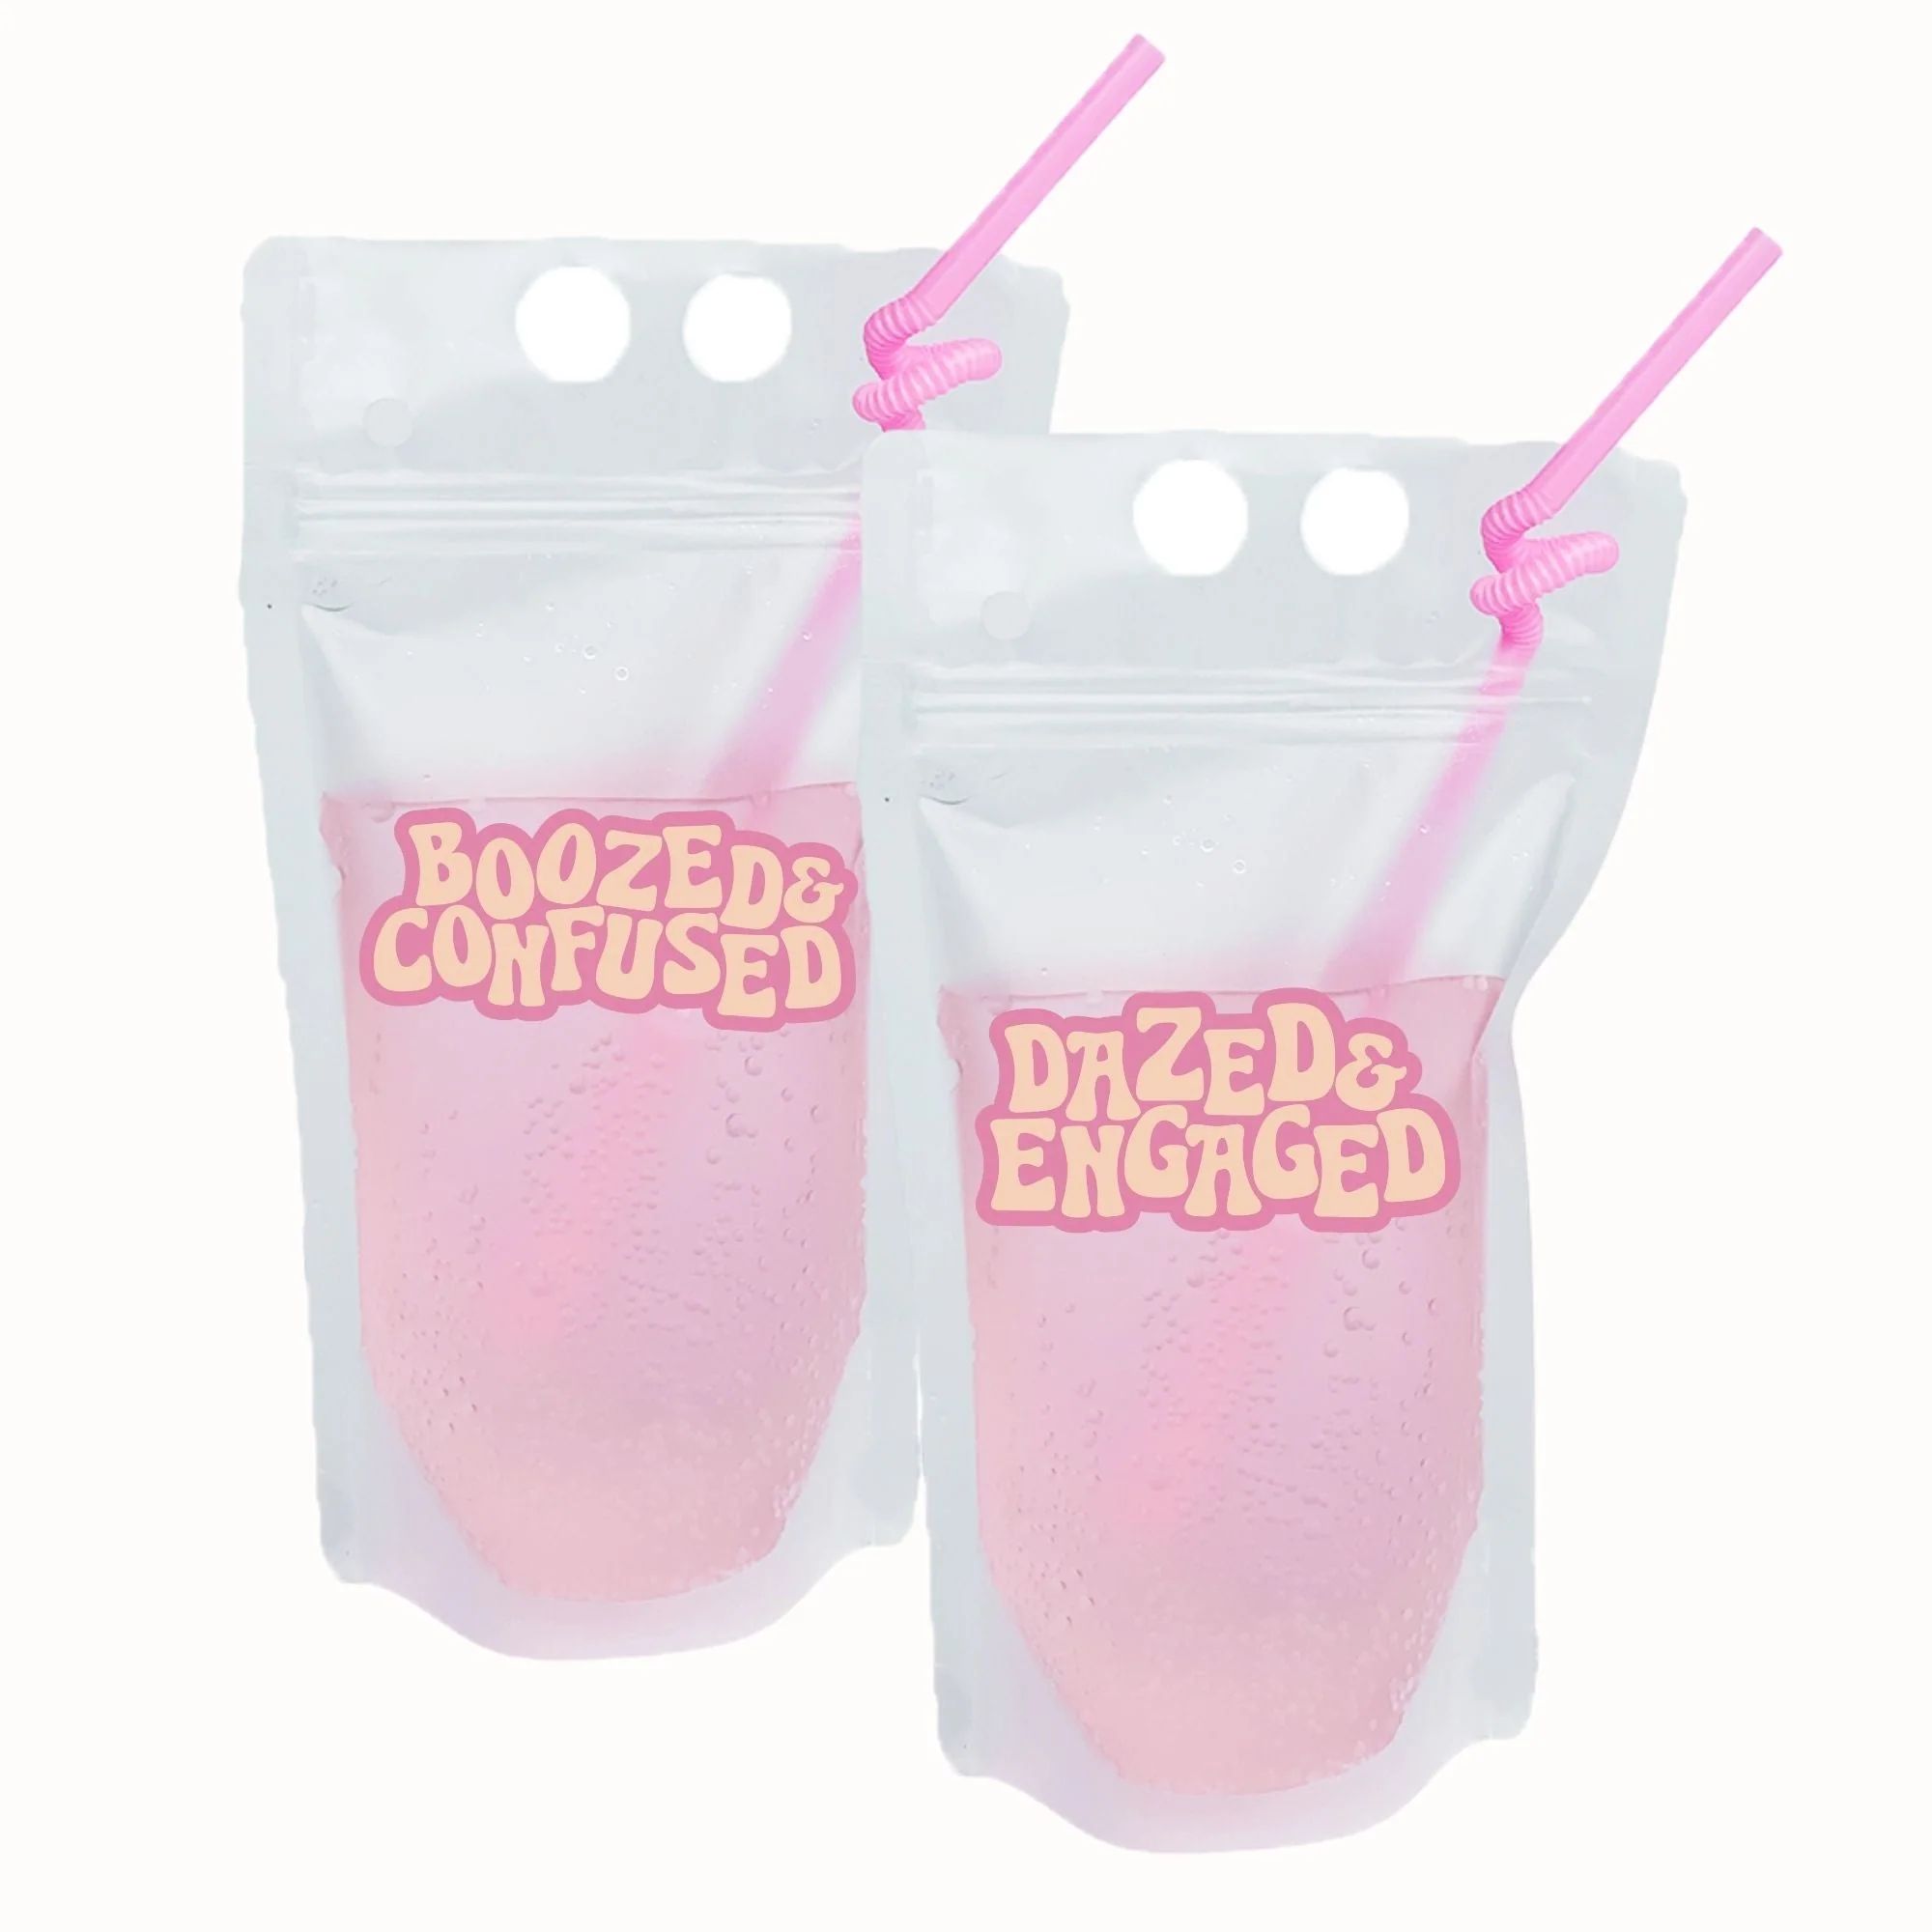 Dazed & Engaged / Boozed & Confused Party Pouch | Sprinkled With Pink